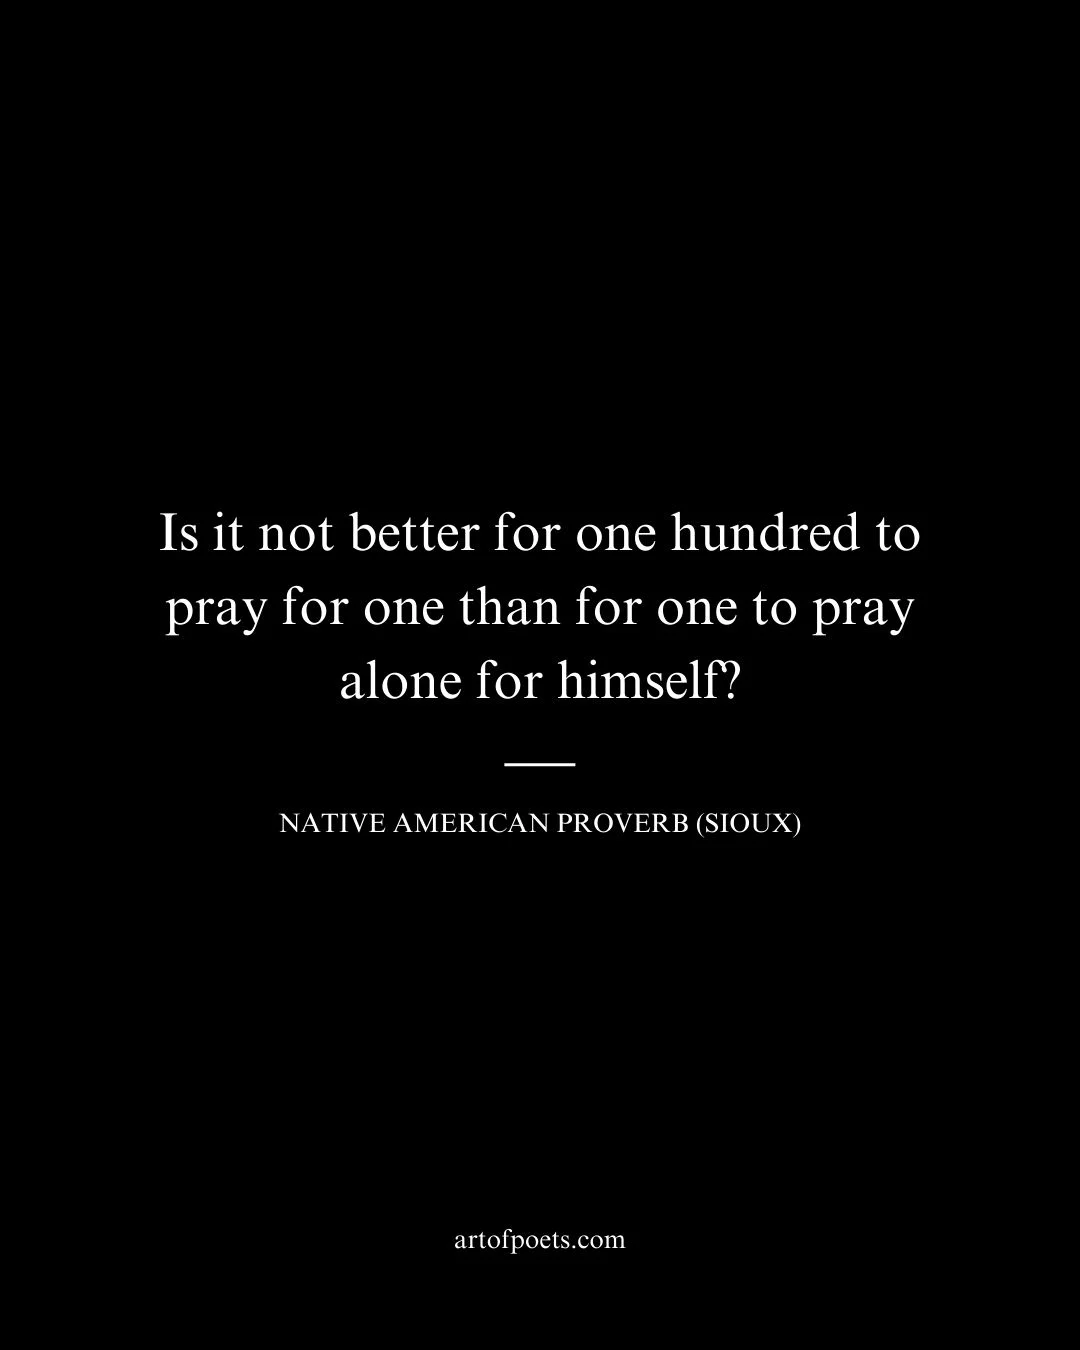 Is it not better for one hundred to pray for one than for one to pray alone for himself